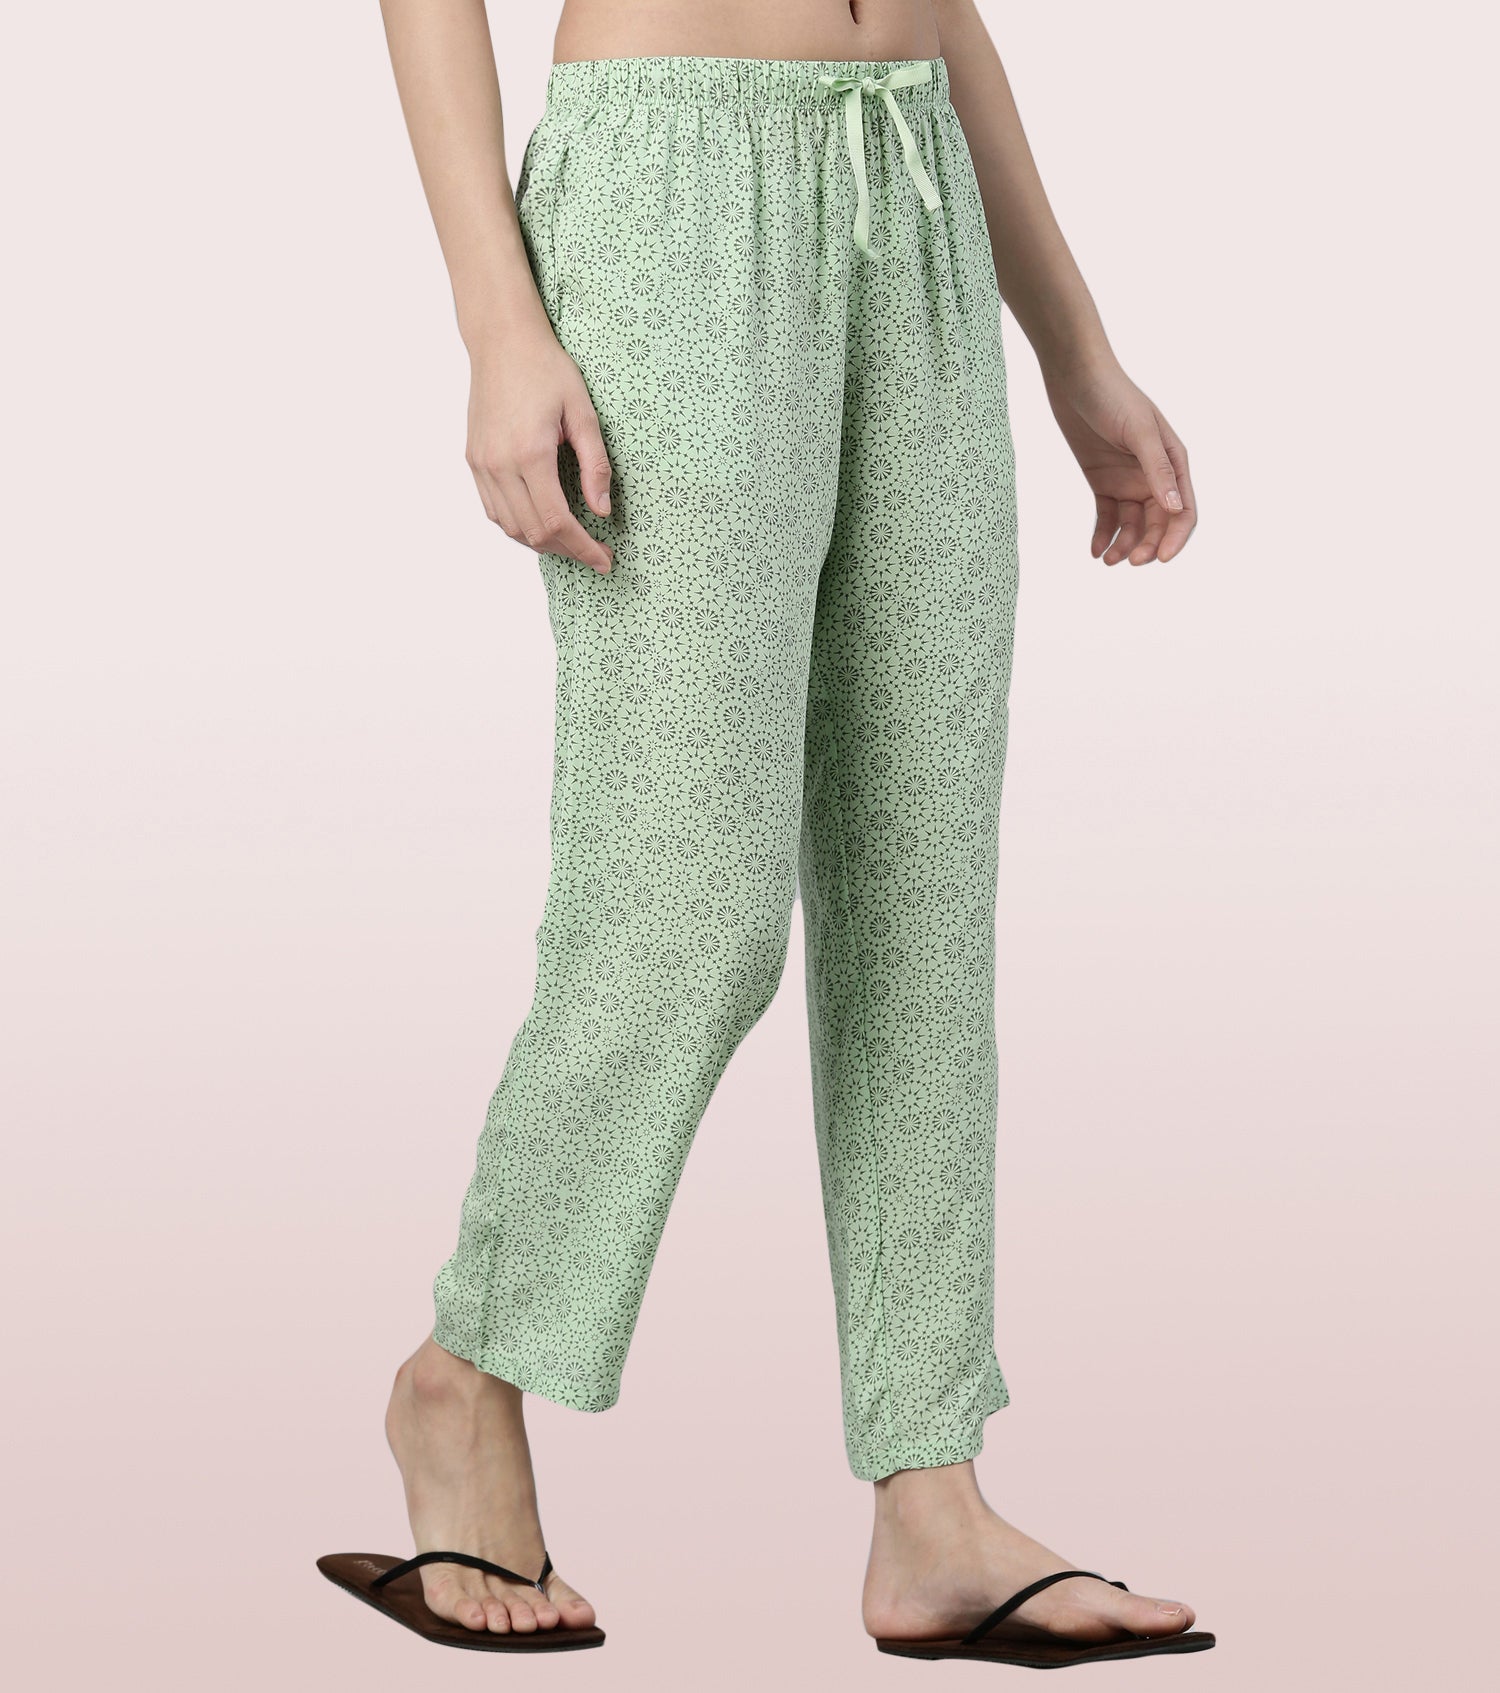 Slounge Pant | Modal Woven Printed Pull-On Pant